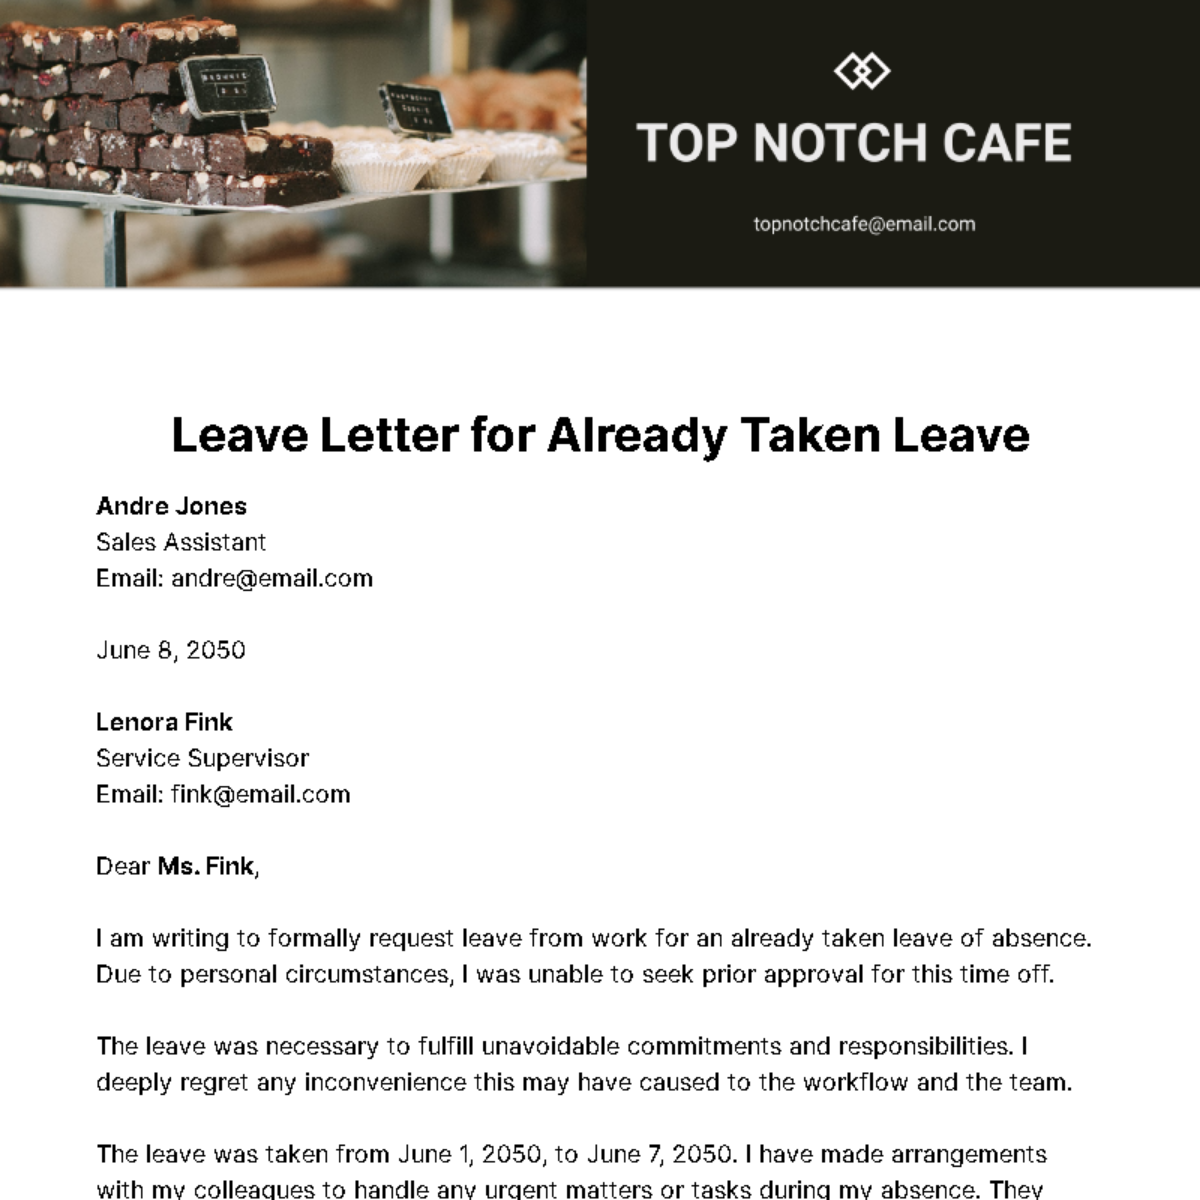 Leave Letter for Already Taken Leave Template